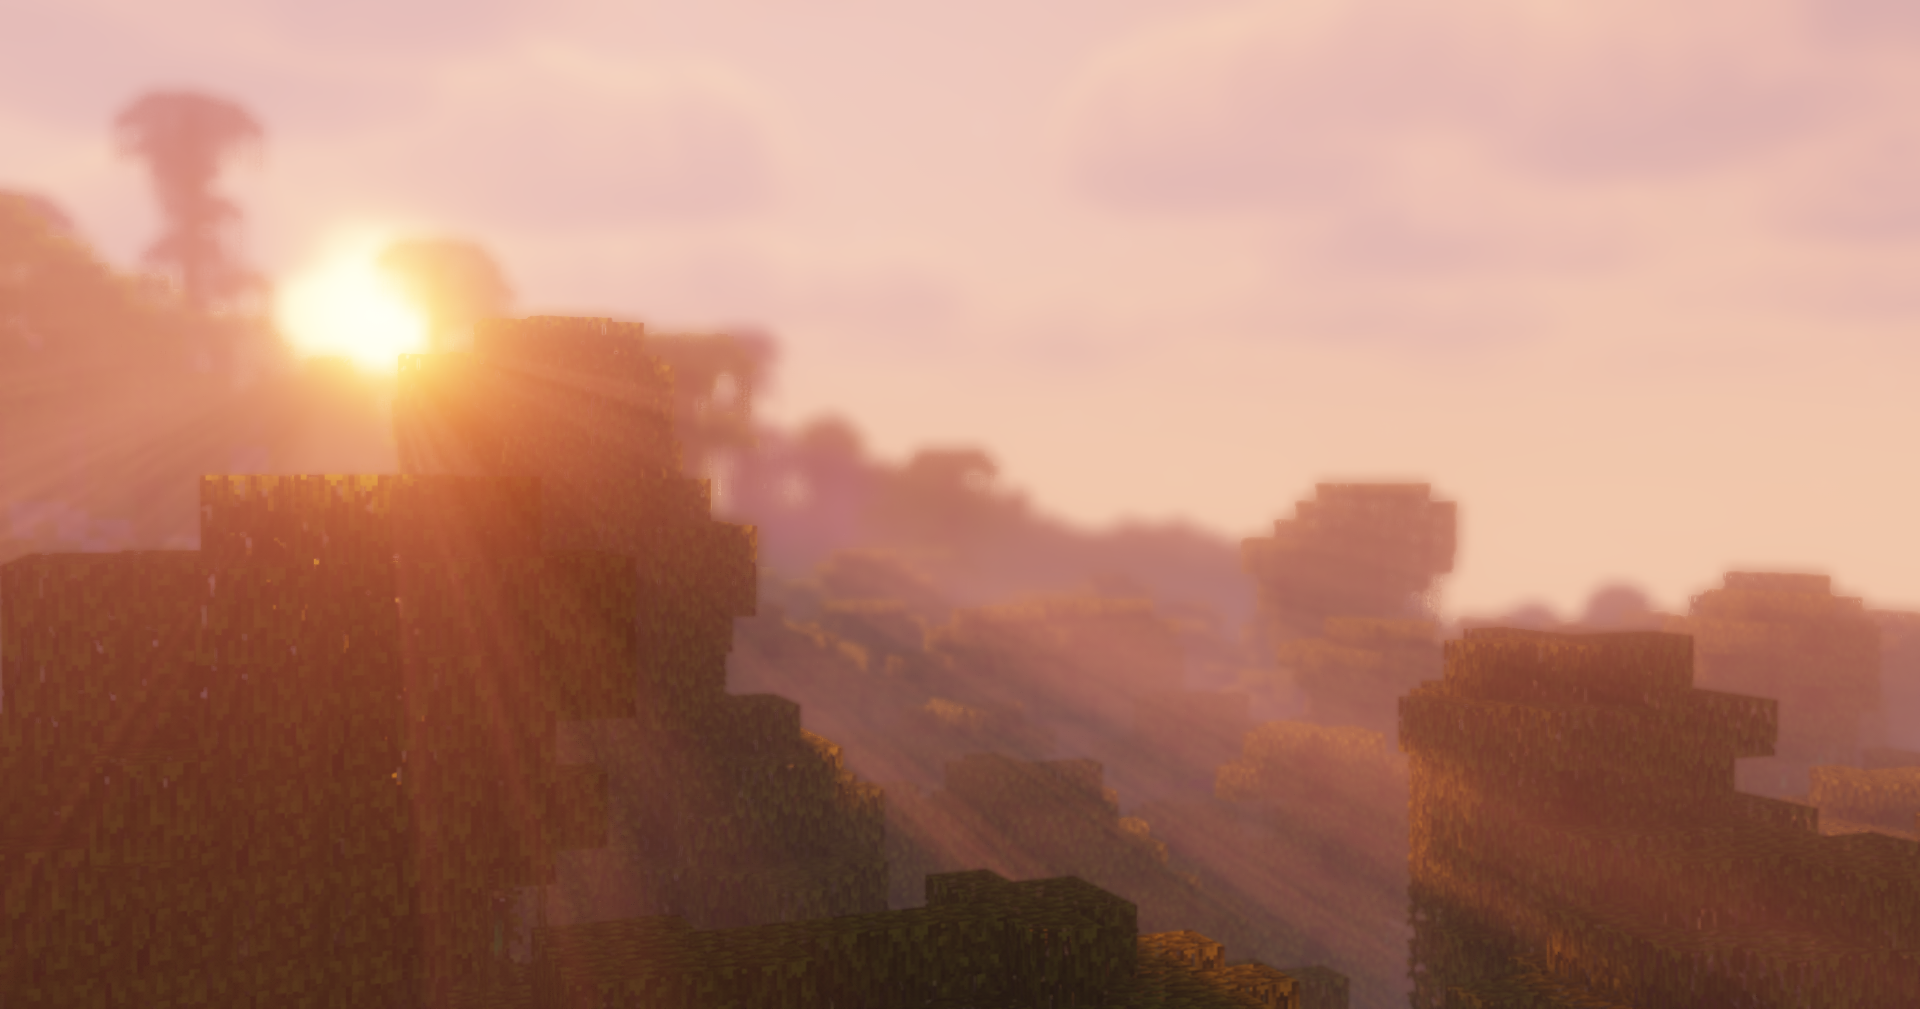 14 Best Shaders for Minecraft 1.18.2 (2022)